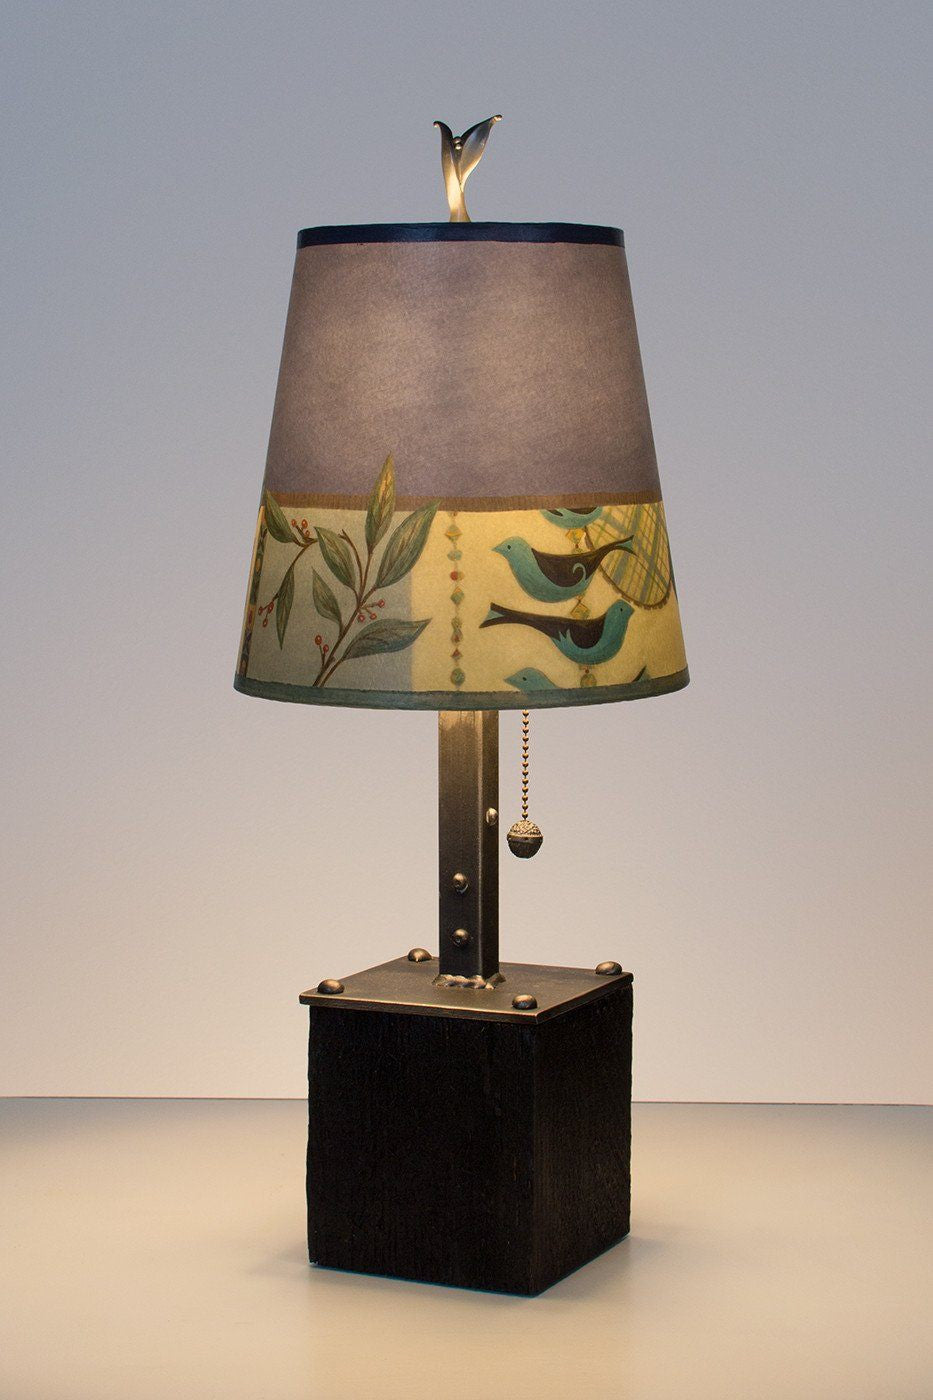 Janna Ugone & Co Table Lamps Steel Table Lamp on Reclaimed Wood with Small Drum Shade in New Capri Periwinkle